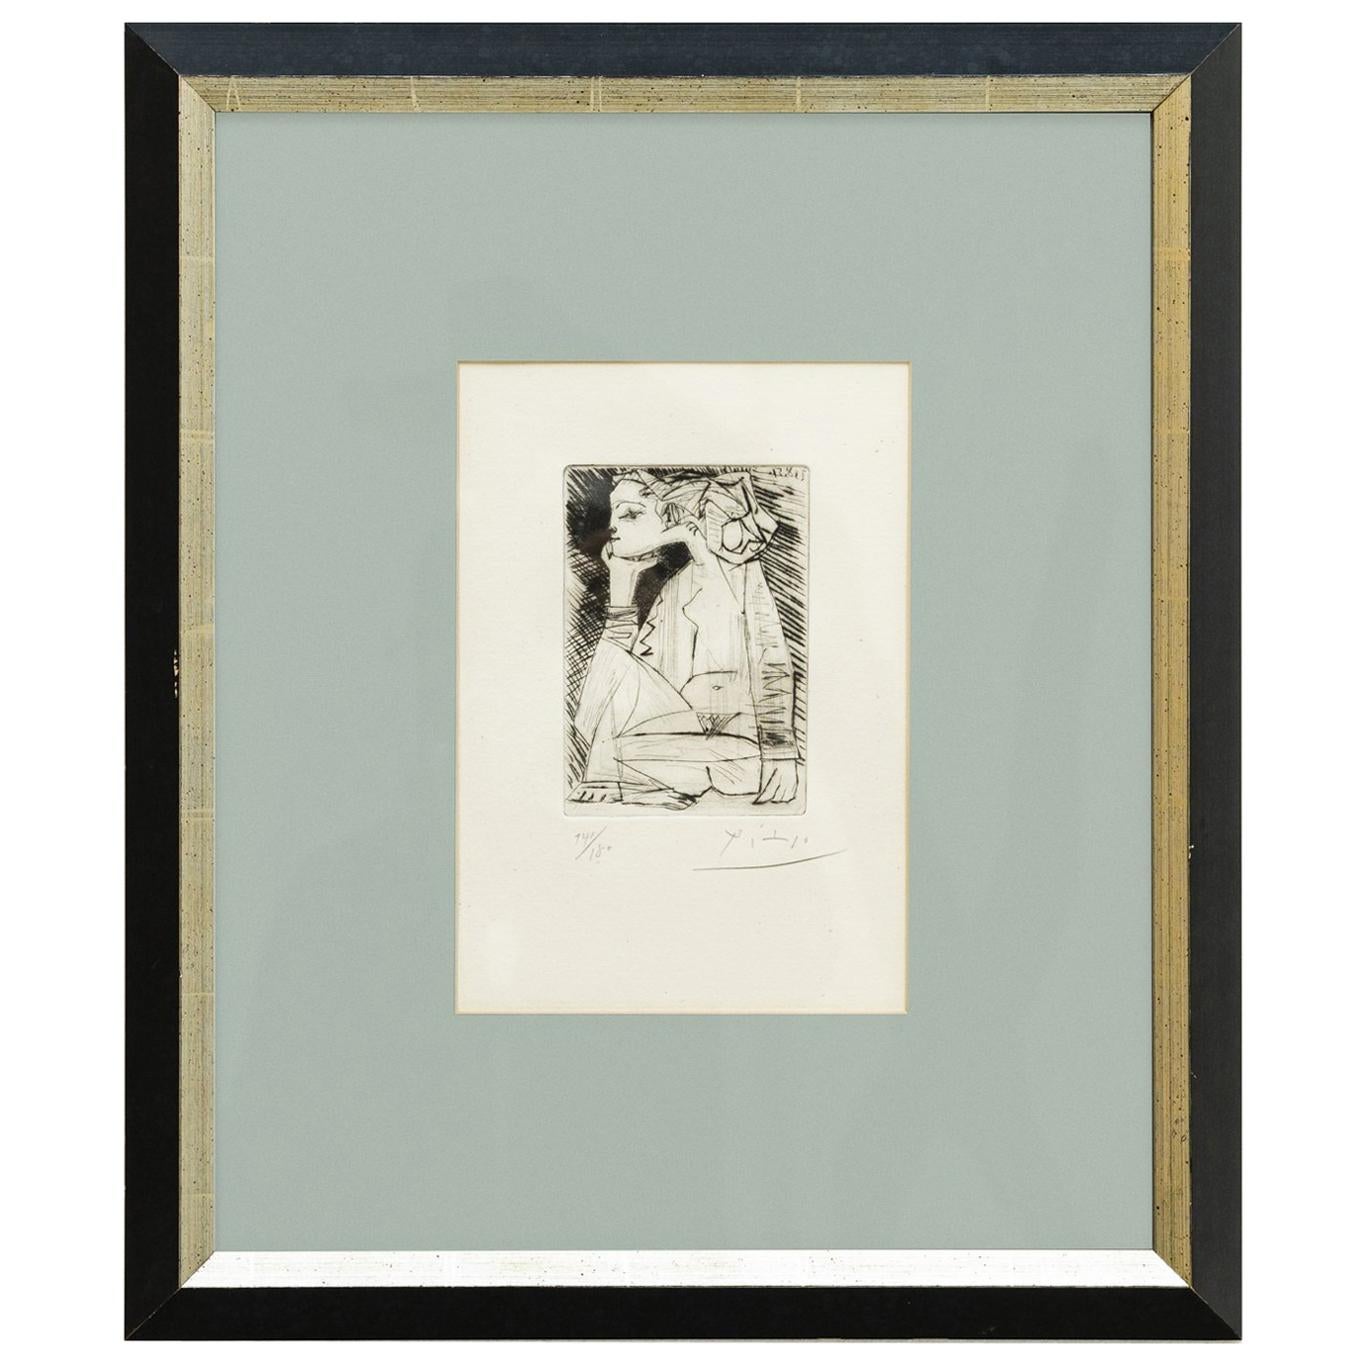 Etching by Pablo Picasso, "Femme Assise En Tailleur: Geneviève Laporte", 1951 im Angebot